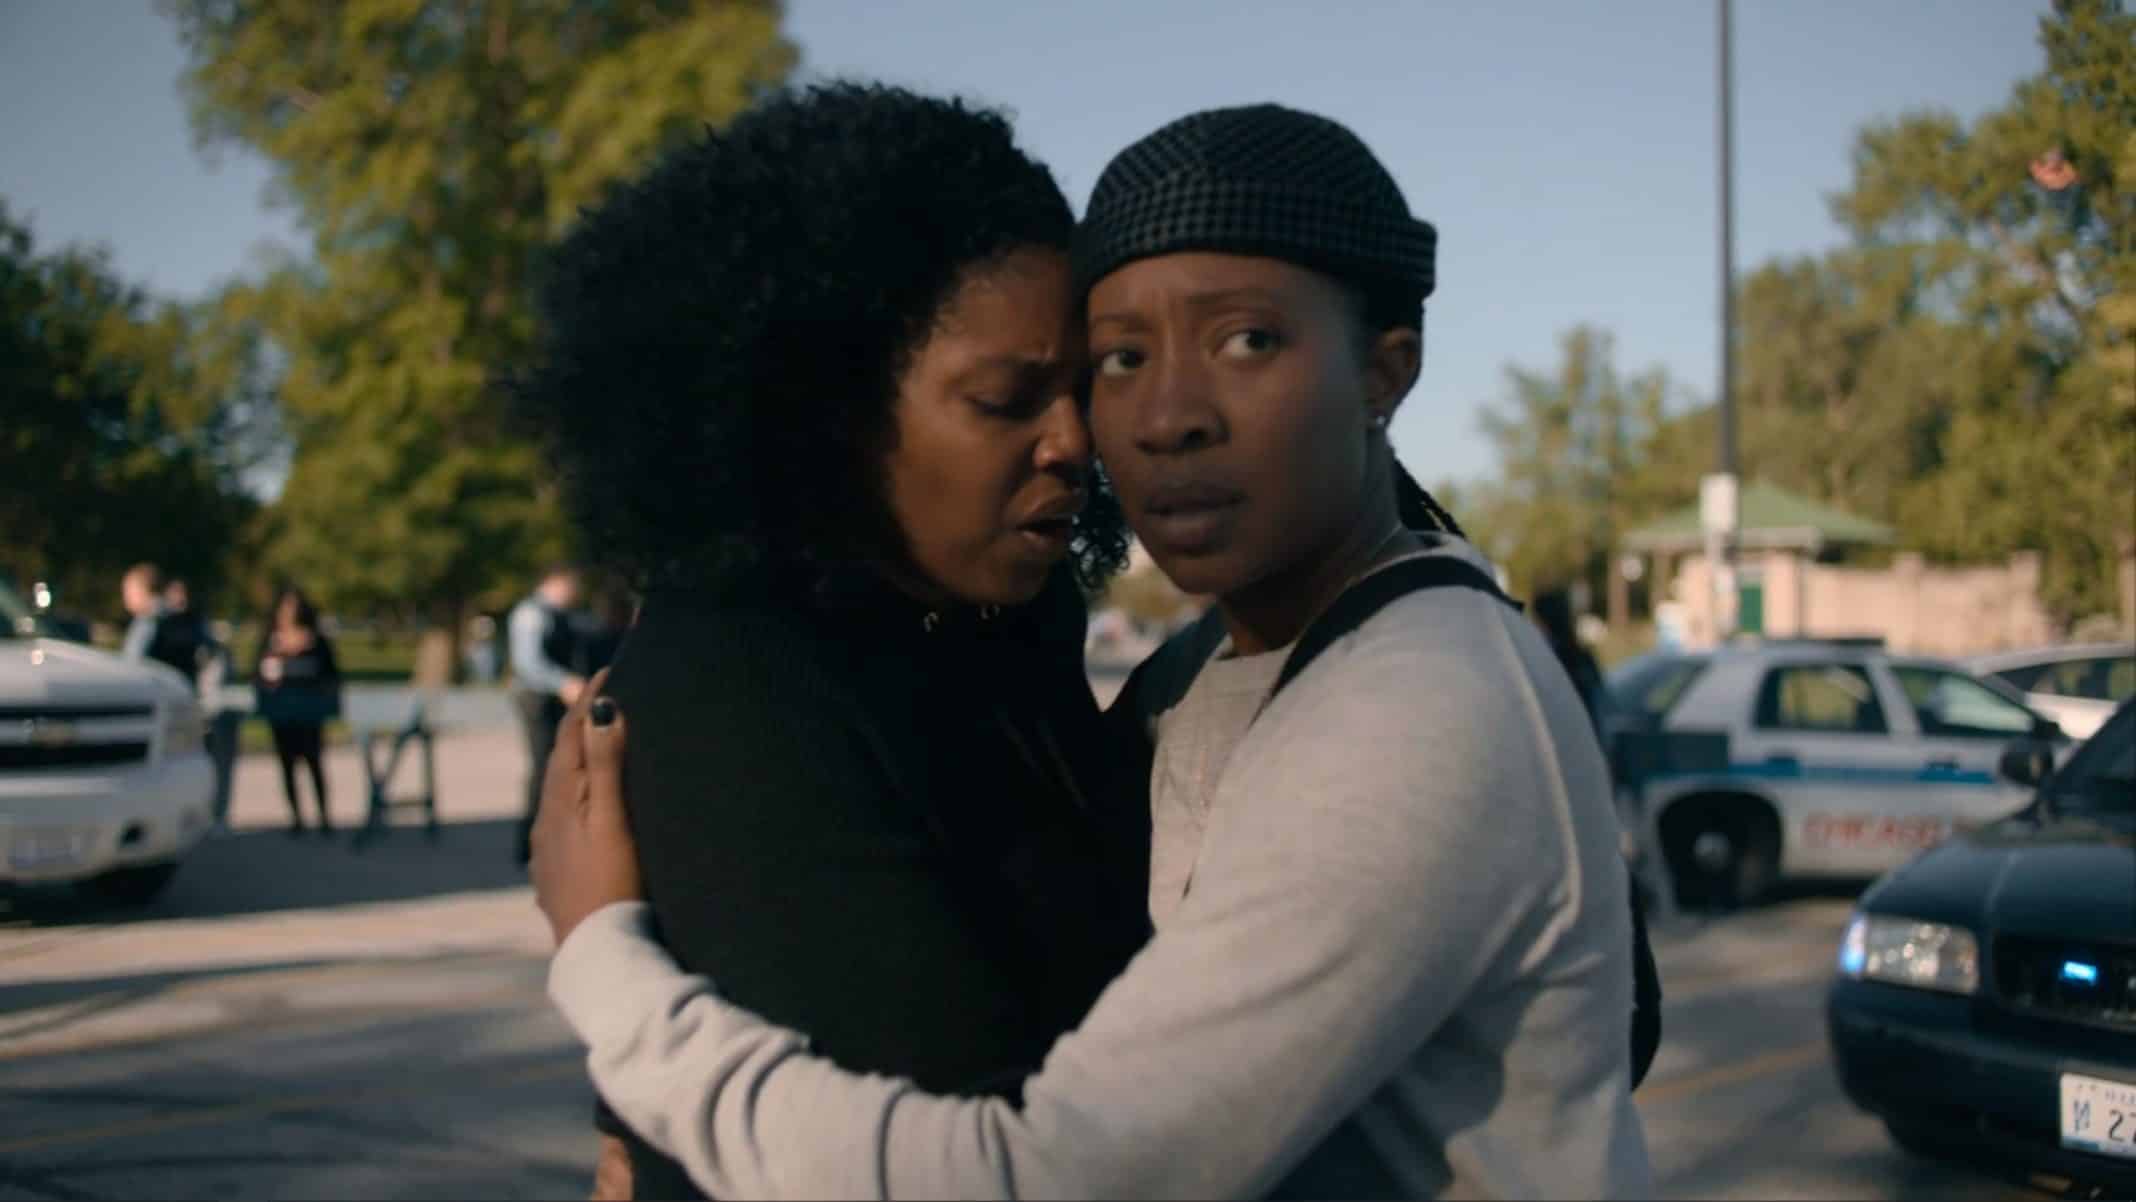 The Chi: Season 3 Episode 4 “Gangway” – Recap/ Review with Spoilers